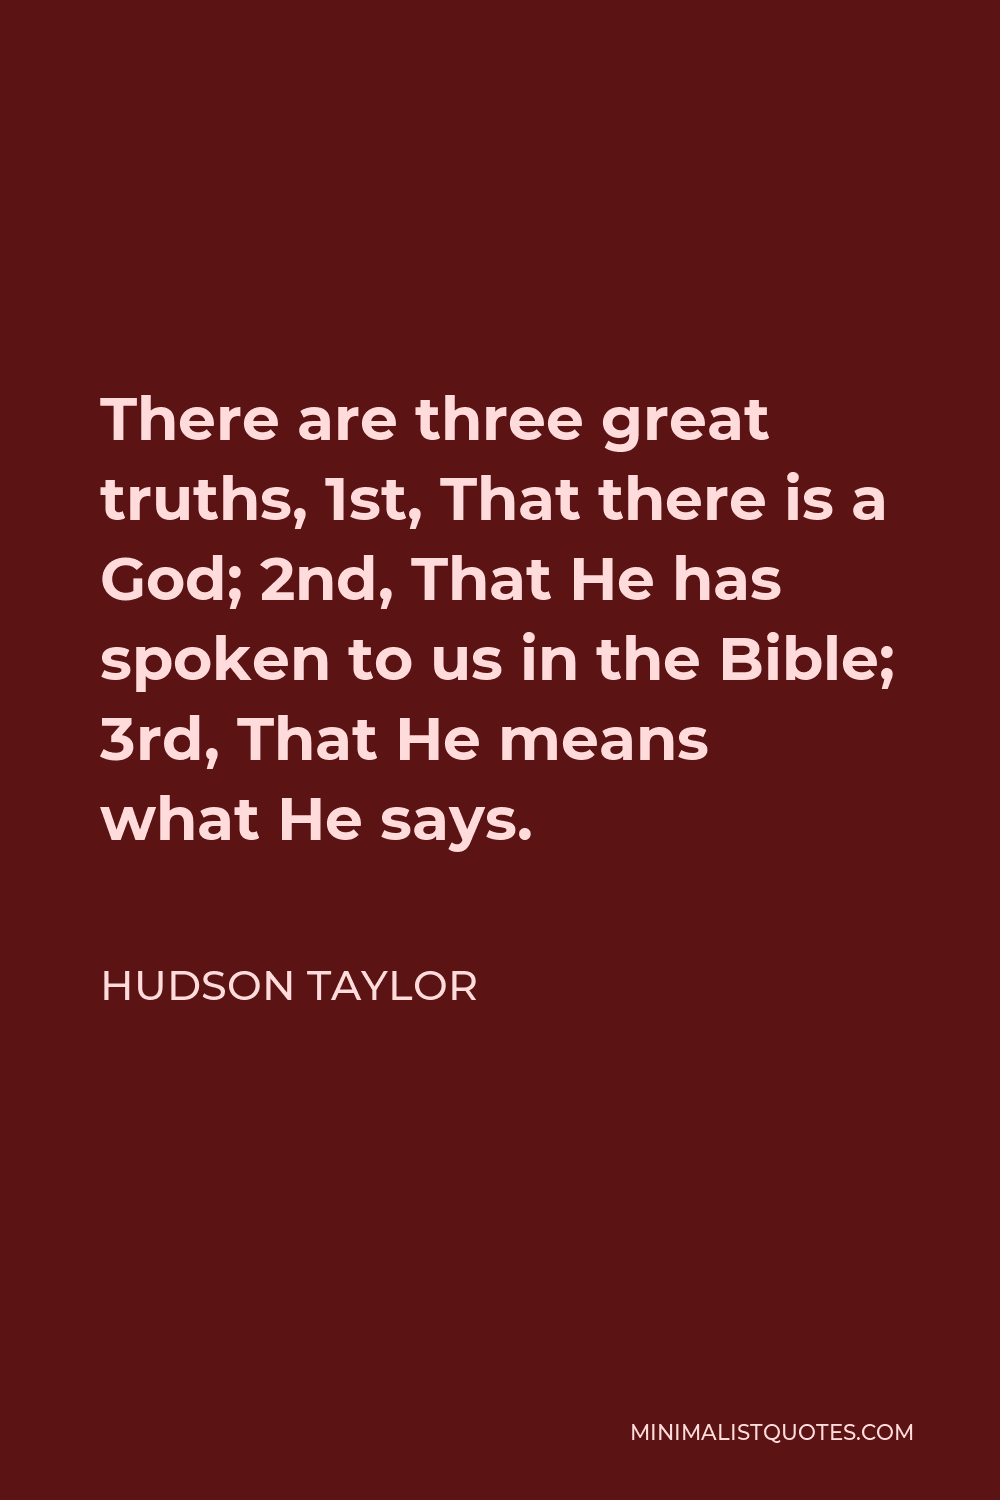 Hudson Taylor Quote - There are three great truths, 1st, That there is a God; 2nd, That He has spoken to us in the Bible; 3rd, That He means what He says.